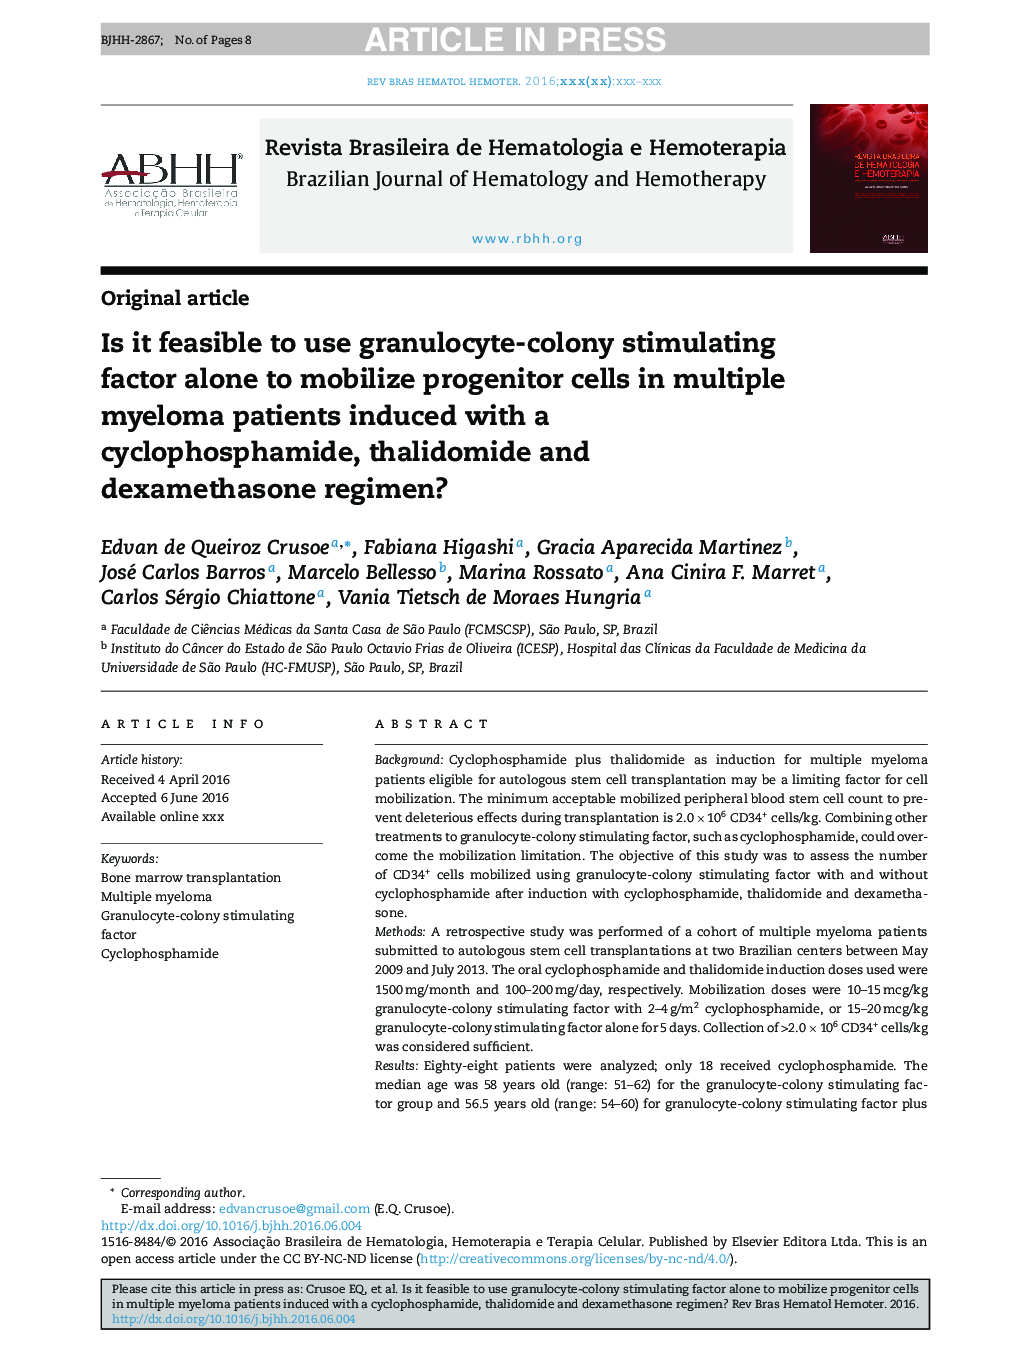 Is it feasible to use granulocyte-colony stimulating factor alone to mobilize progenitor cells in multiple myeloma patients induced with a cyclophosphamide, thalidomide and dexamethasone regimen?